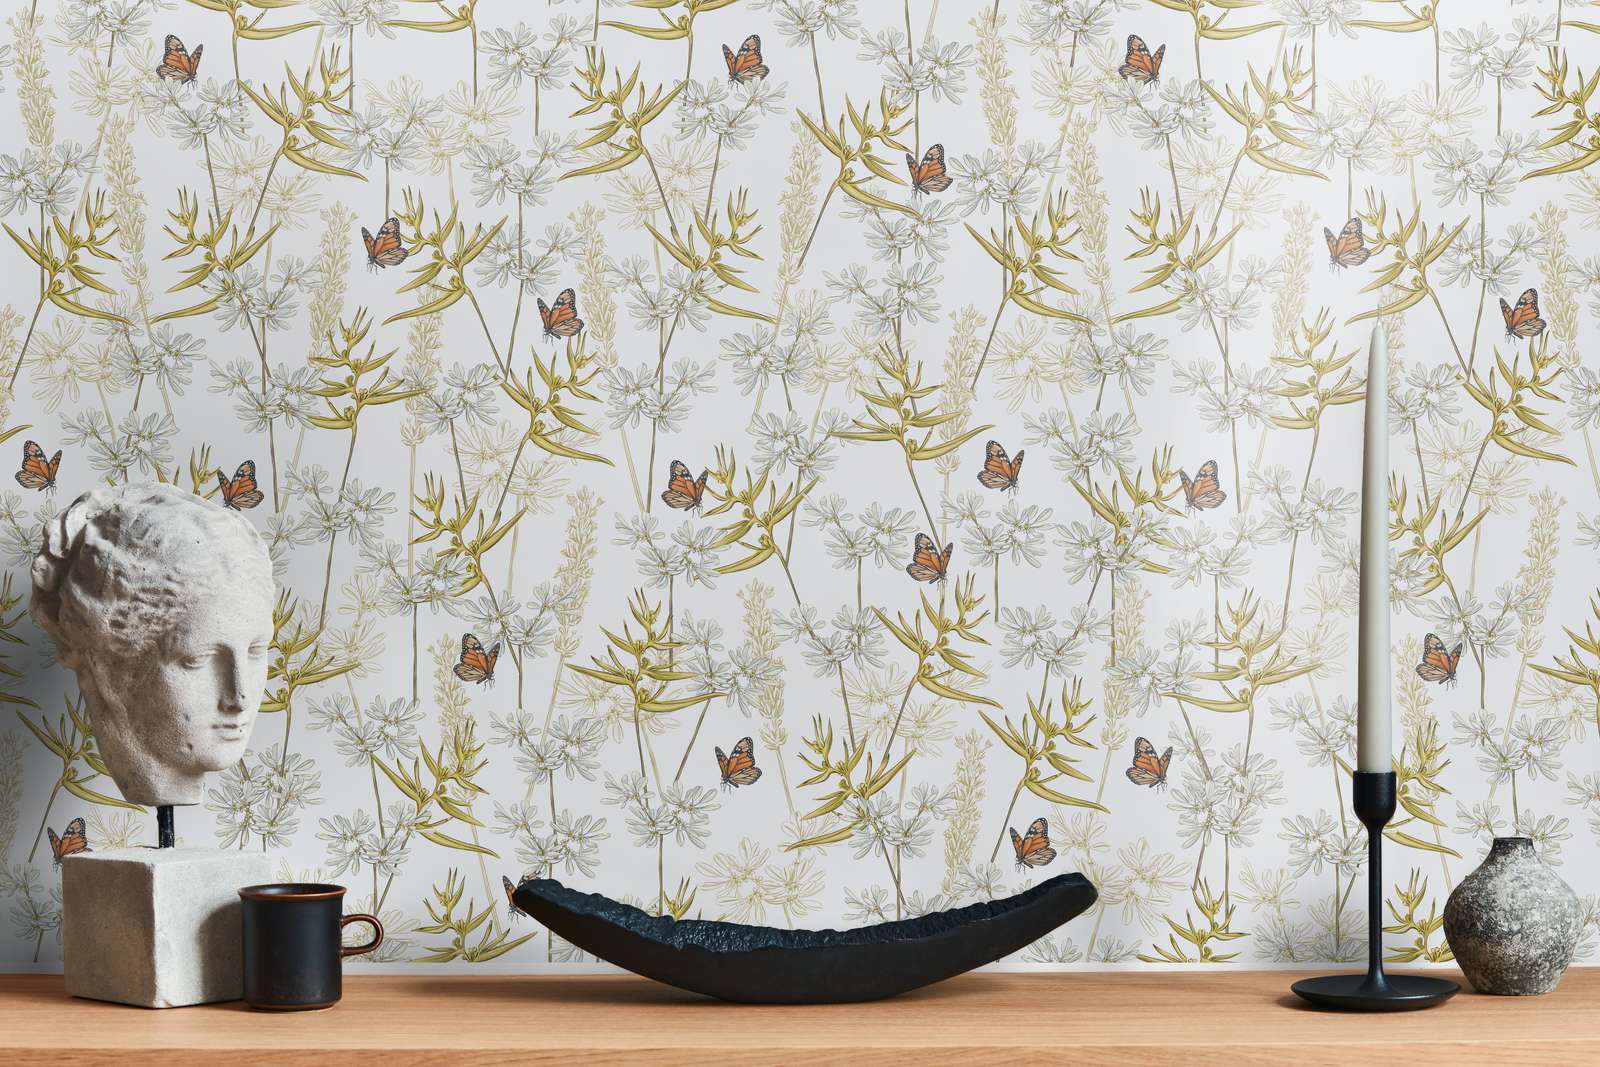             Floral style wallpaper with grasses & butterflies textured matt - white, yellow, grey
        